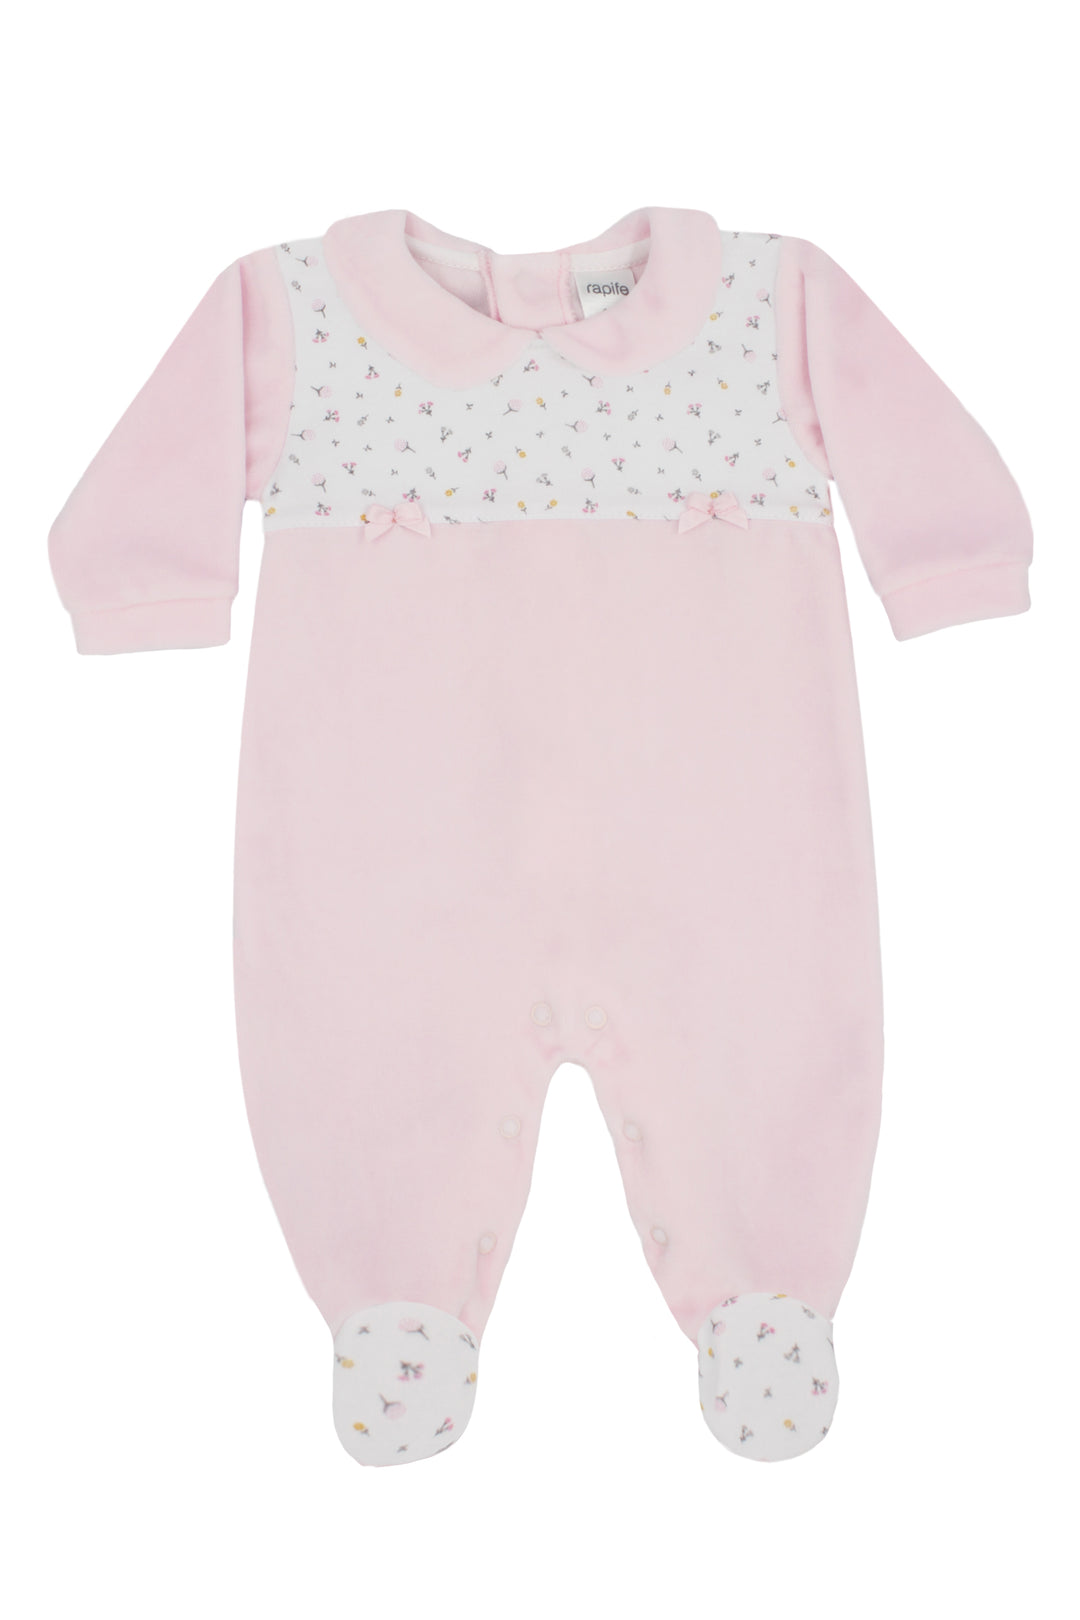 Rapife "Dottie" Pink Velour Floral Sleepsuit | iphoneandroidapplications